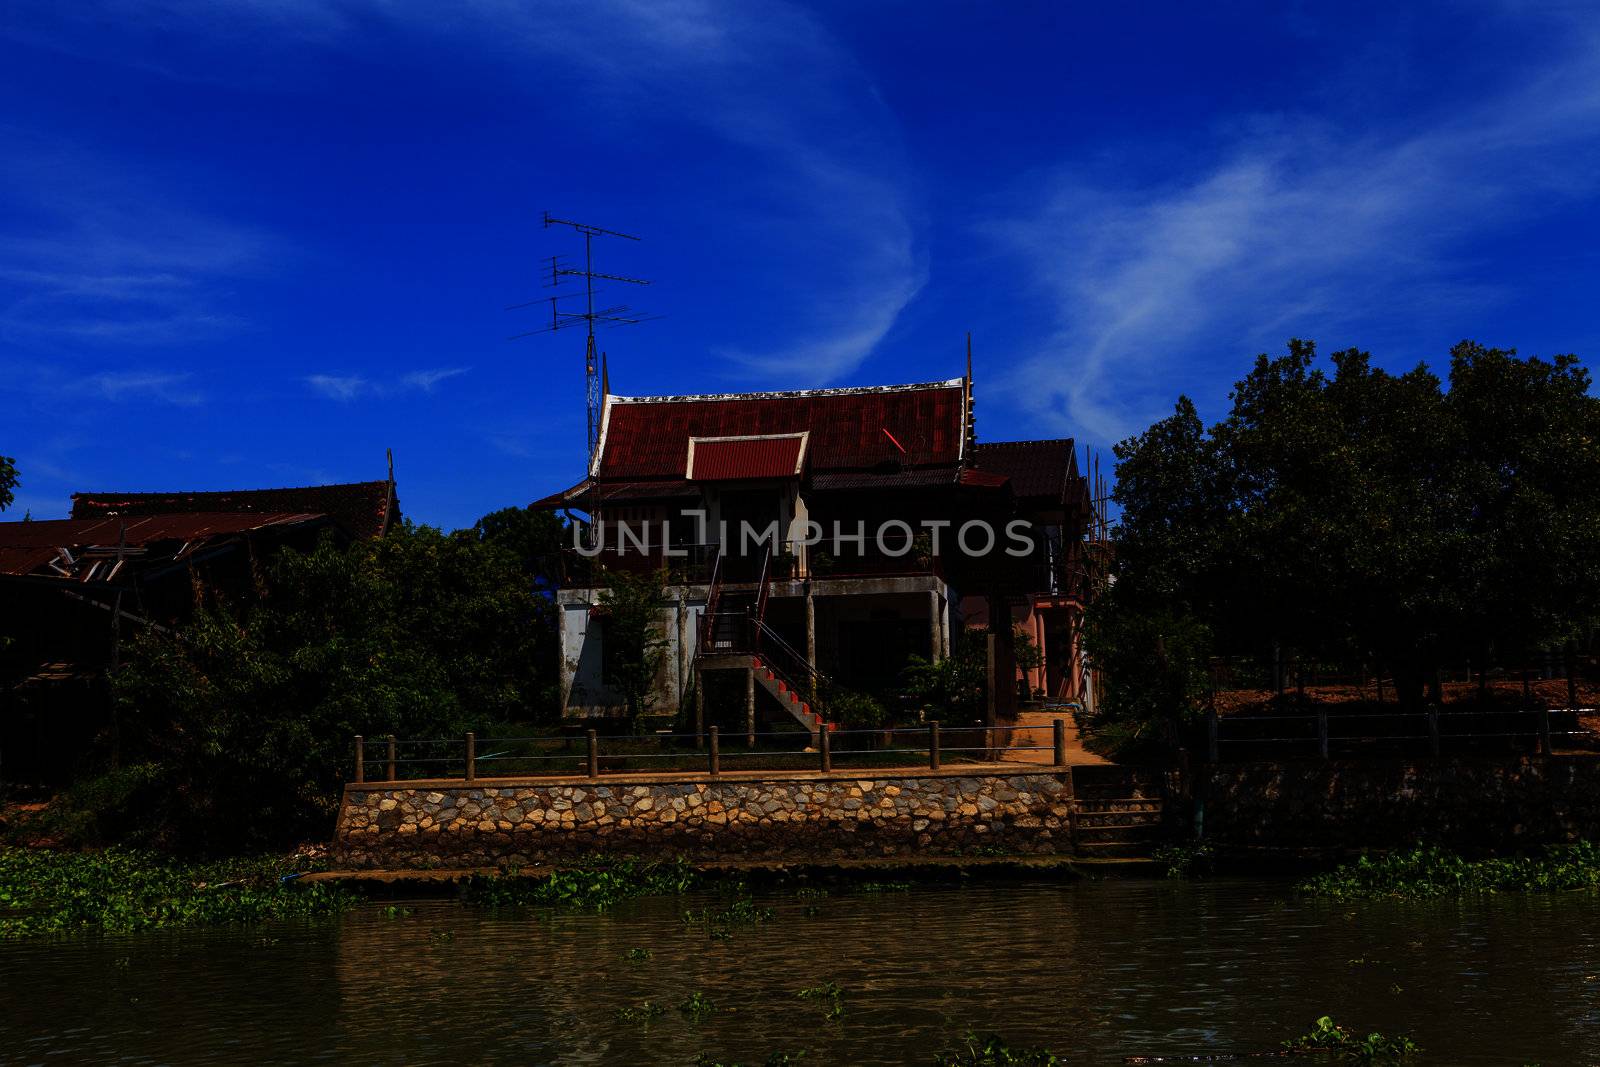 Thai traditional house along the river, Living with natural take photo from river.